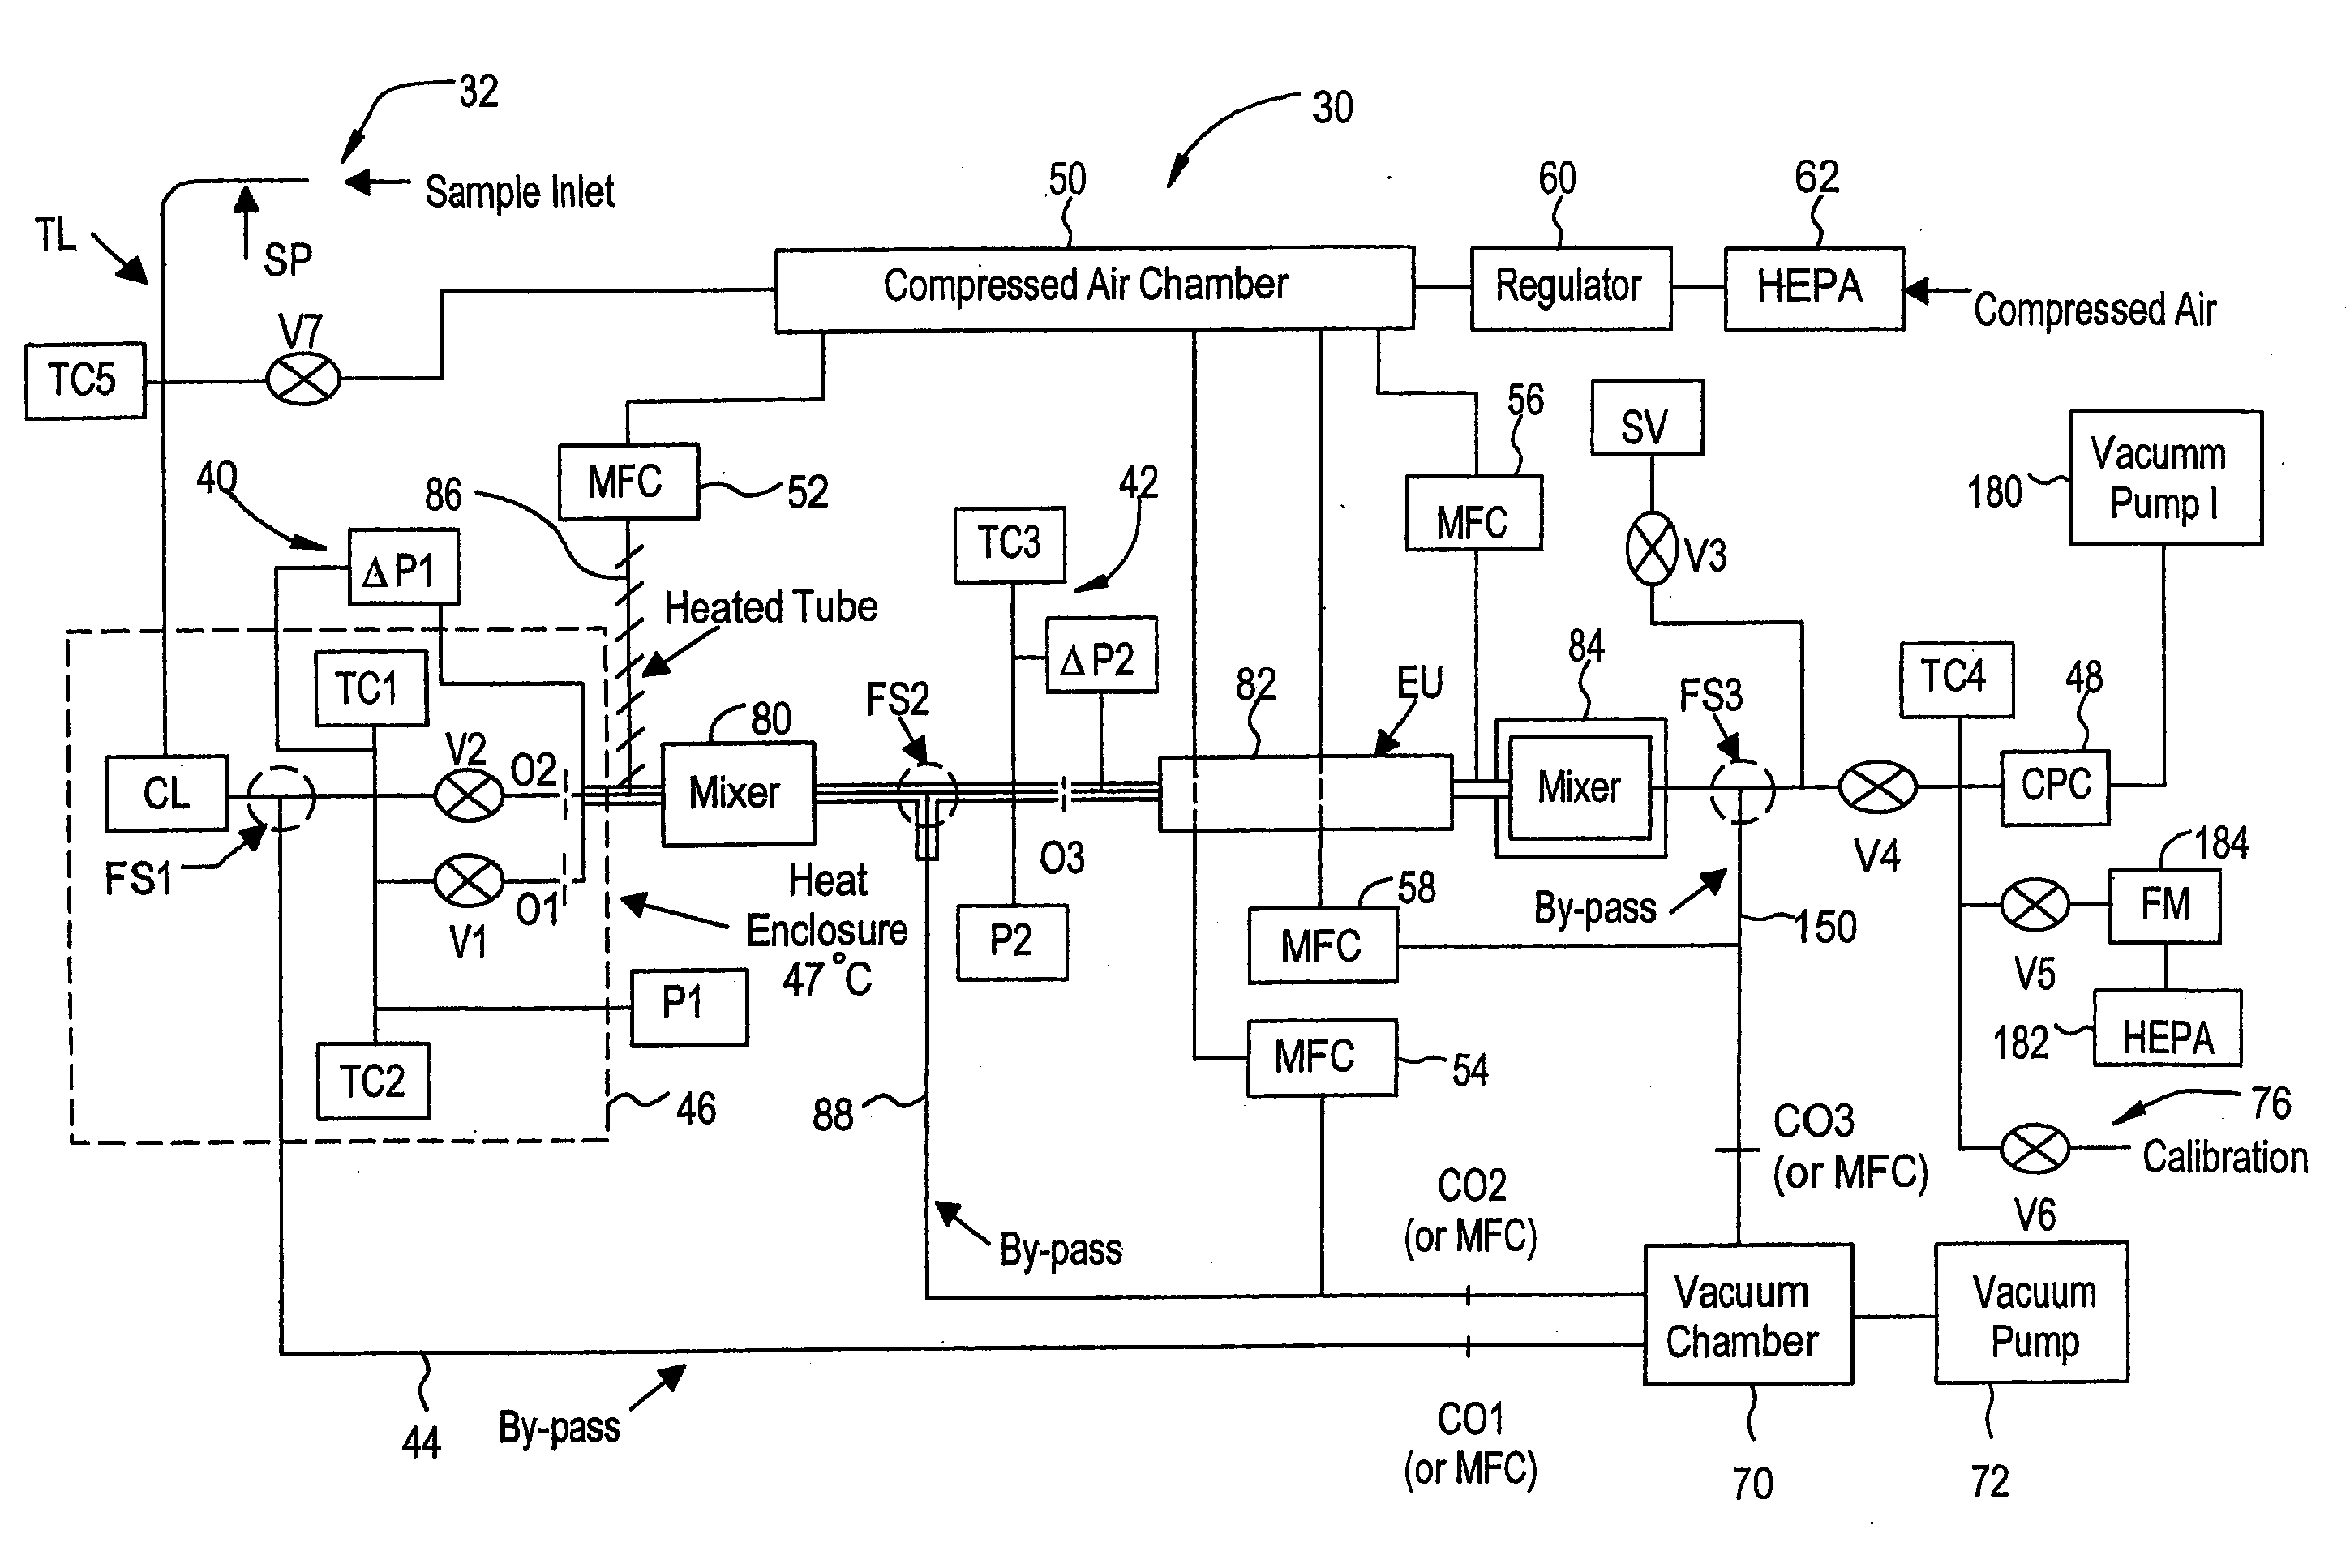 Solid particle counting system with flow meter upstream of evaporation unit